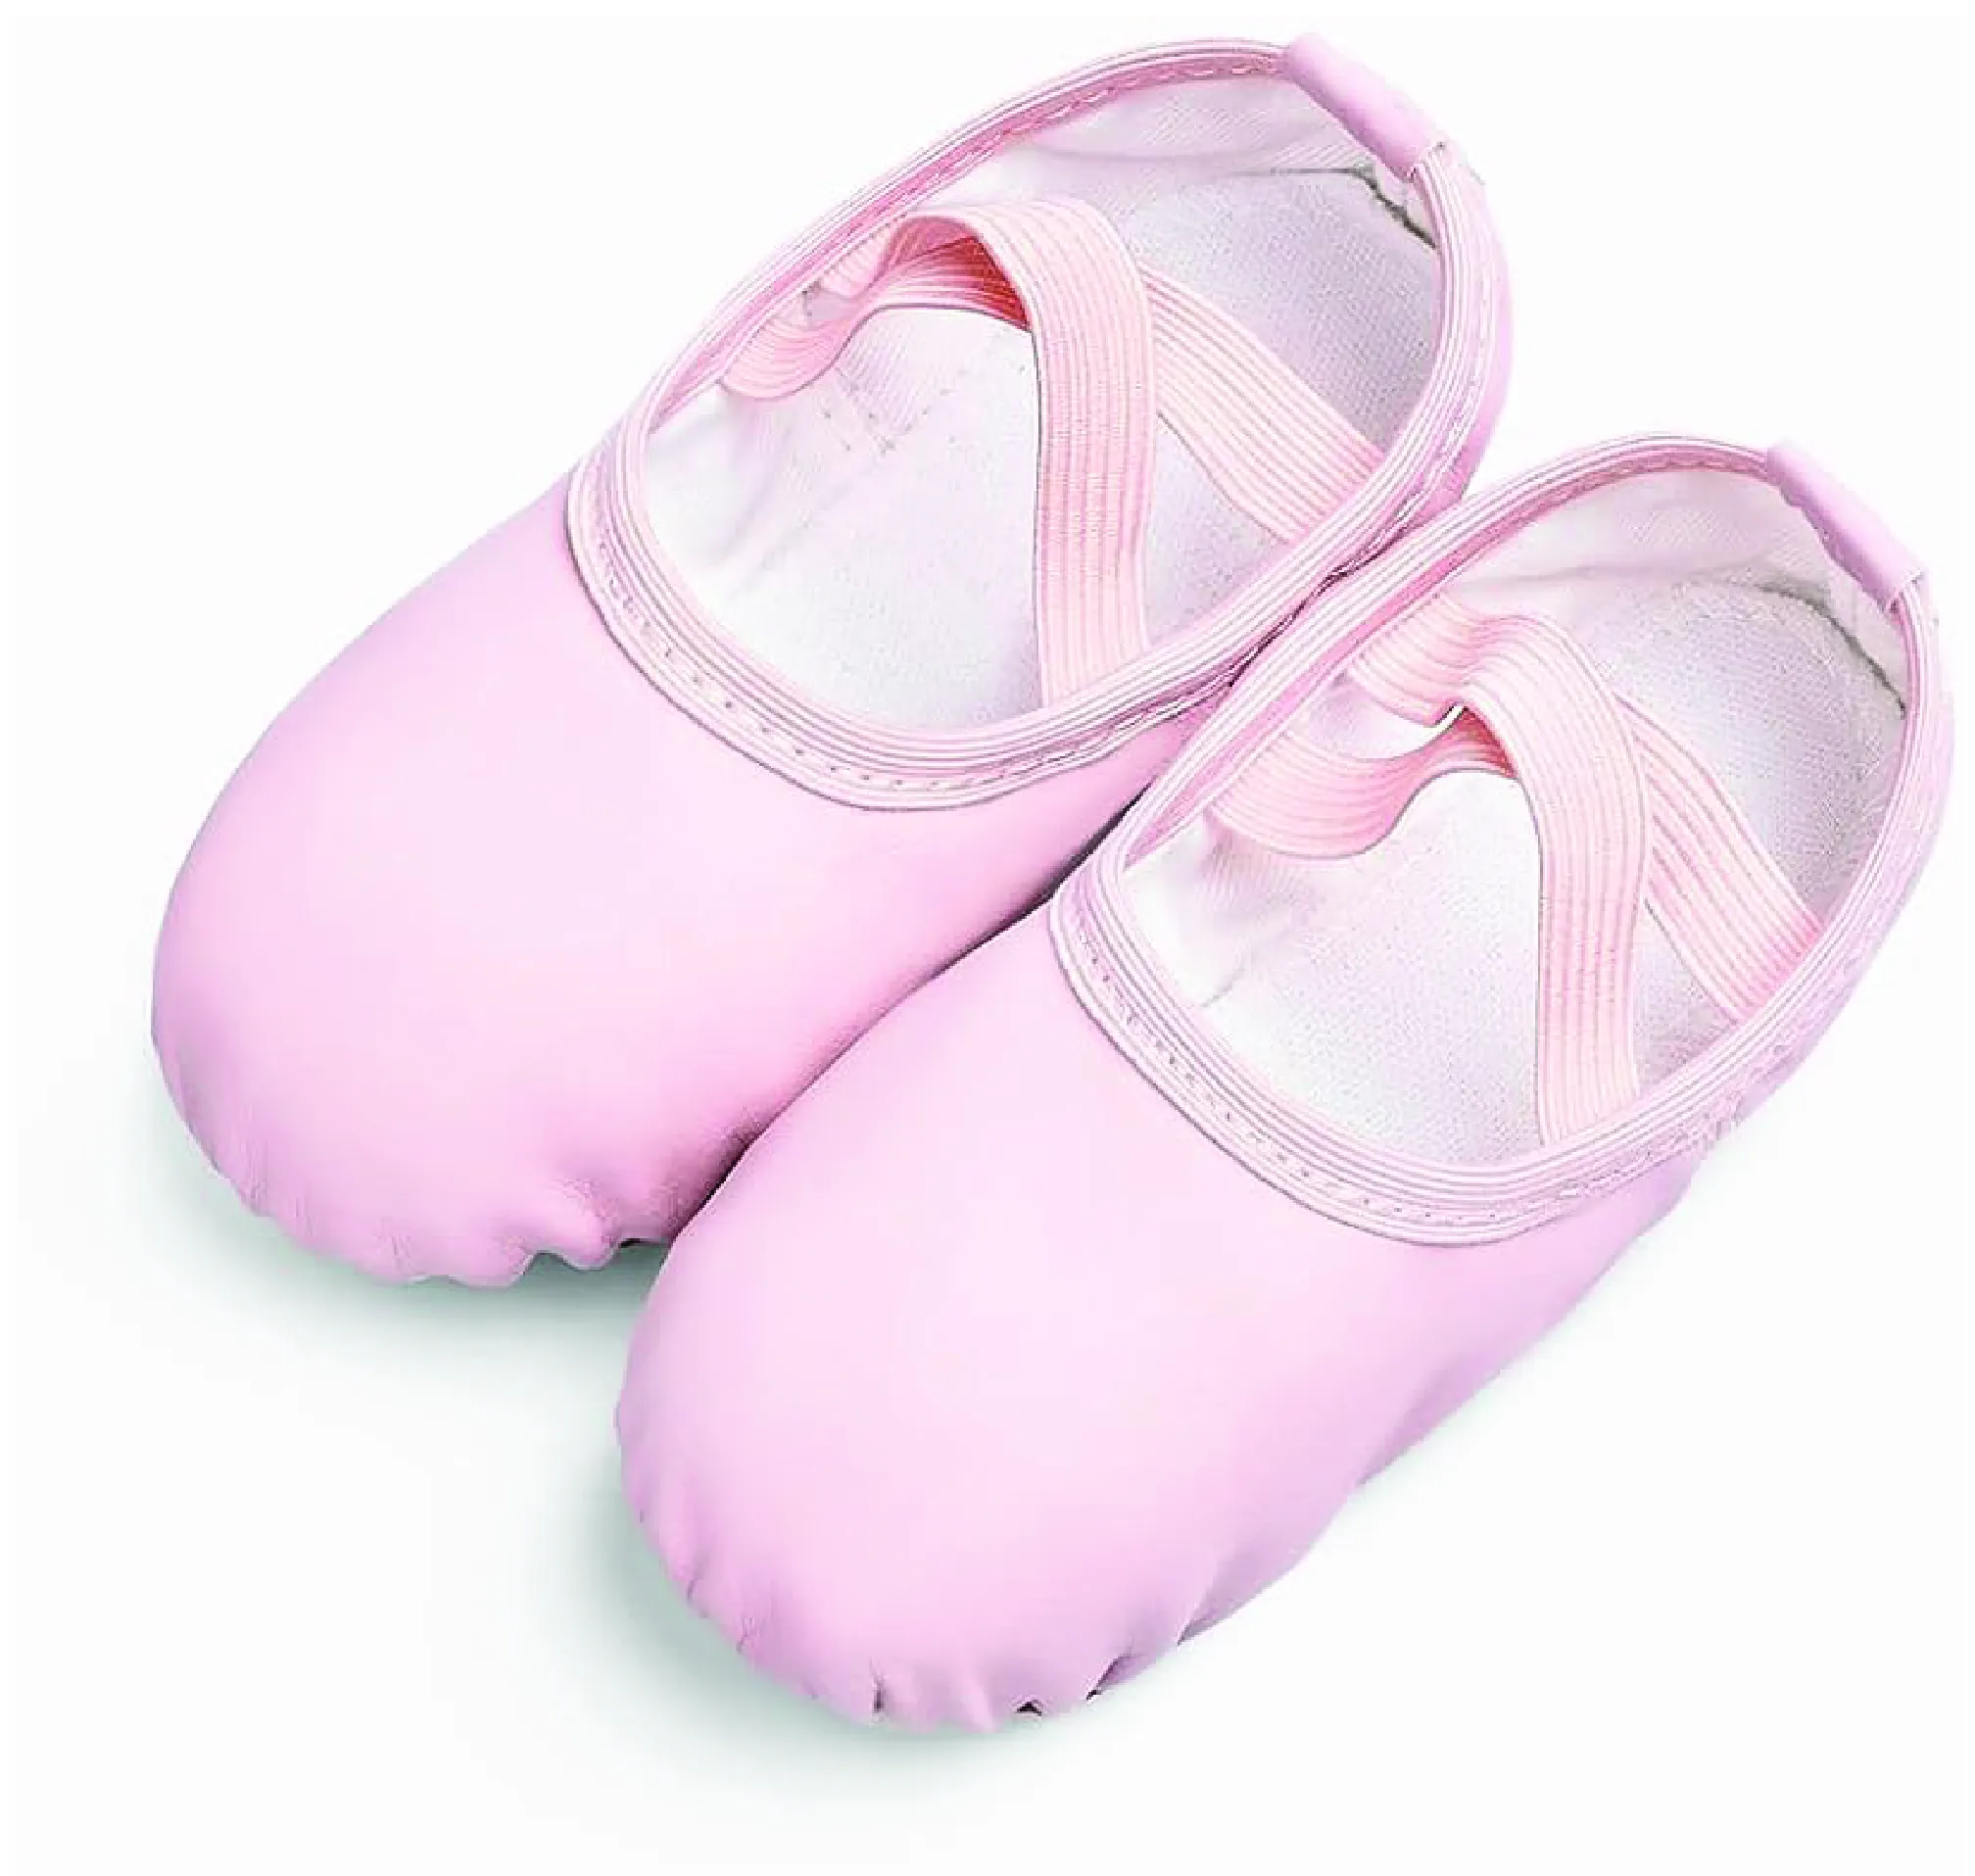 Hot Pink Real Cow Leather Full Sole Women Men Ballet Dance Flat Shoes Slippers Pointe Dance Shoes for Girls Kids Ballet Shoes